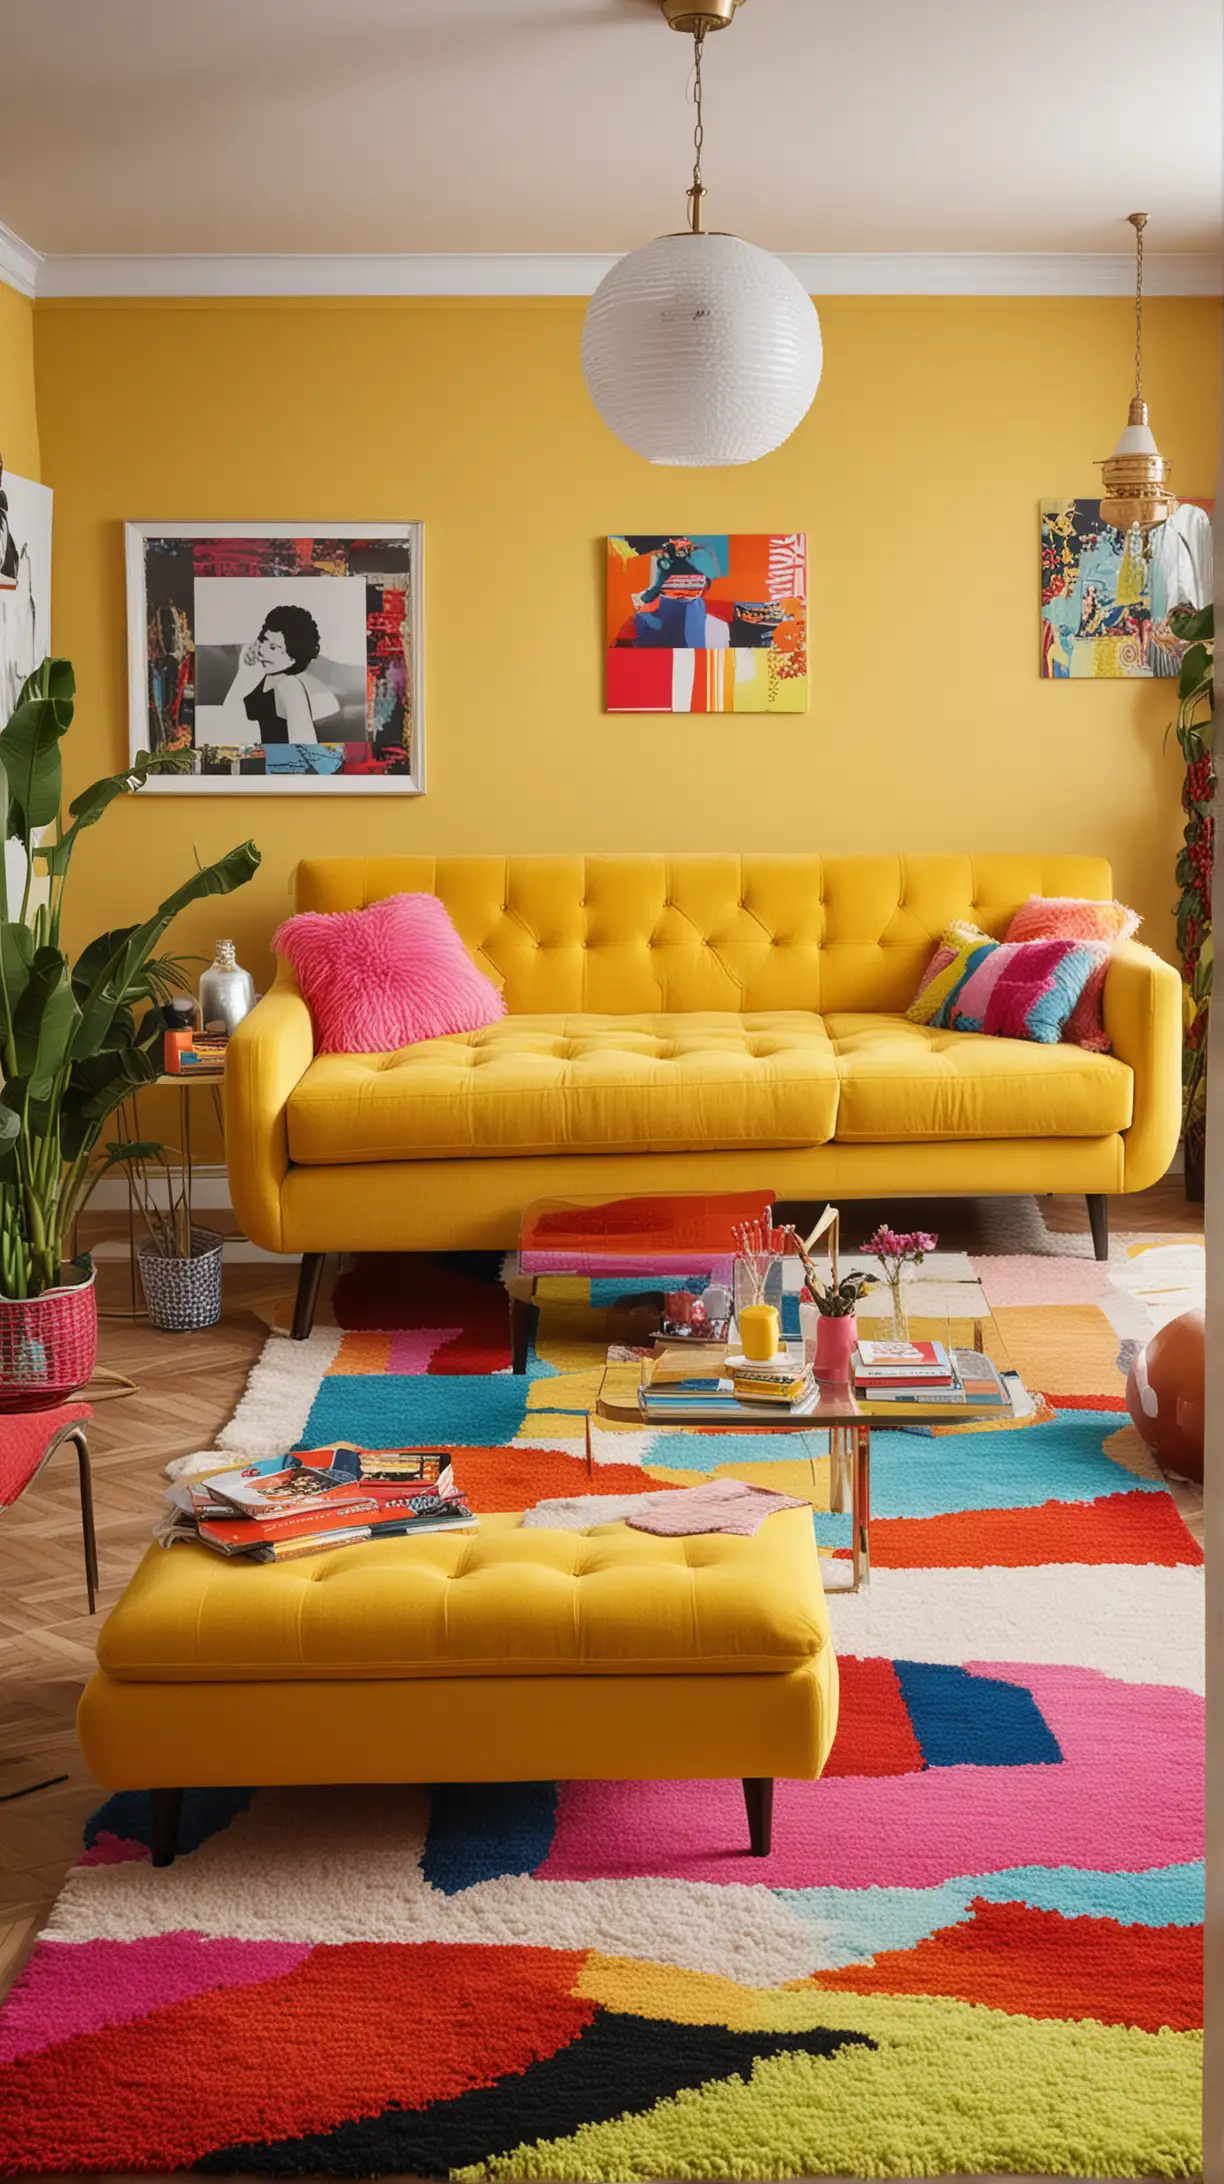 Retro Living Room with Bright Yellow Couch and Colorful Pop Art